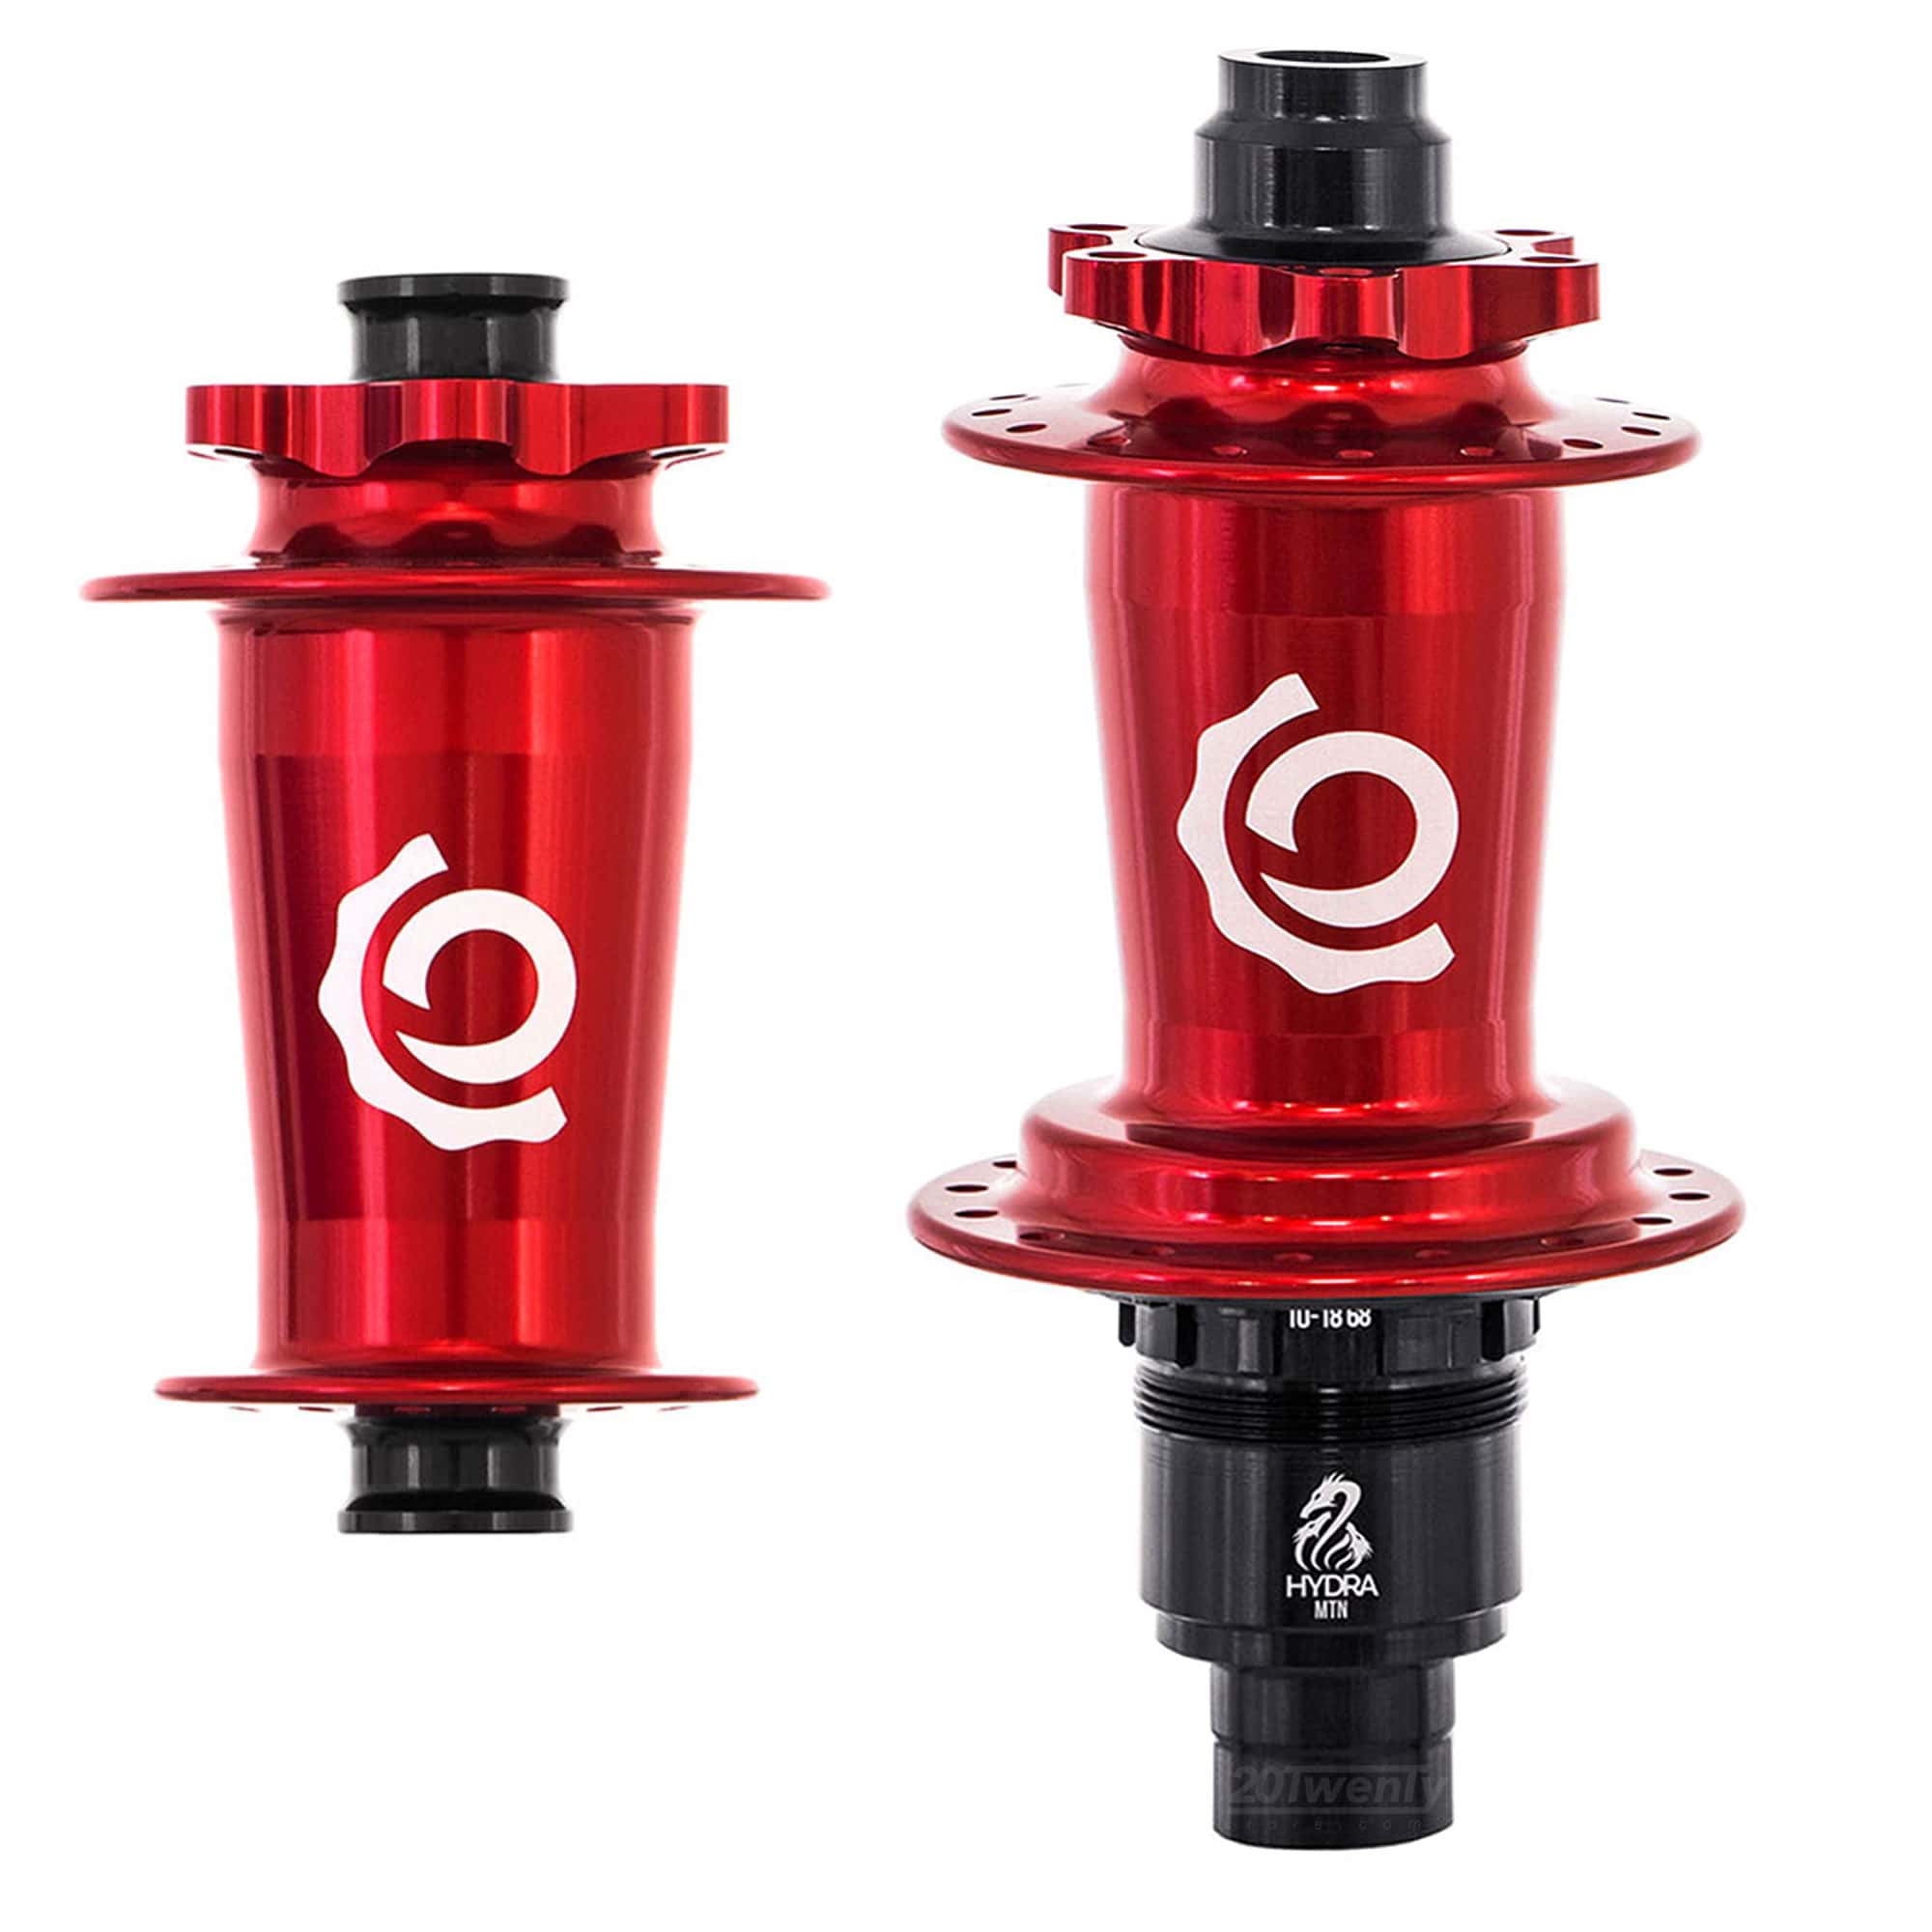 Industry 9 Hydra Classic Boost/SuperBoost 6 Bolt Hubs Red Pair